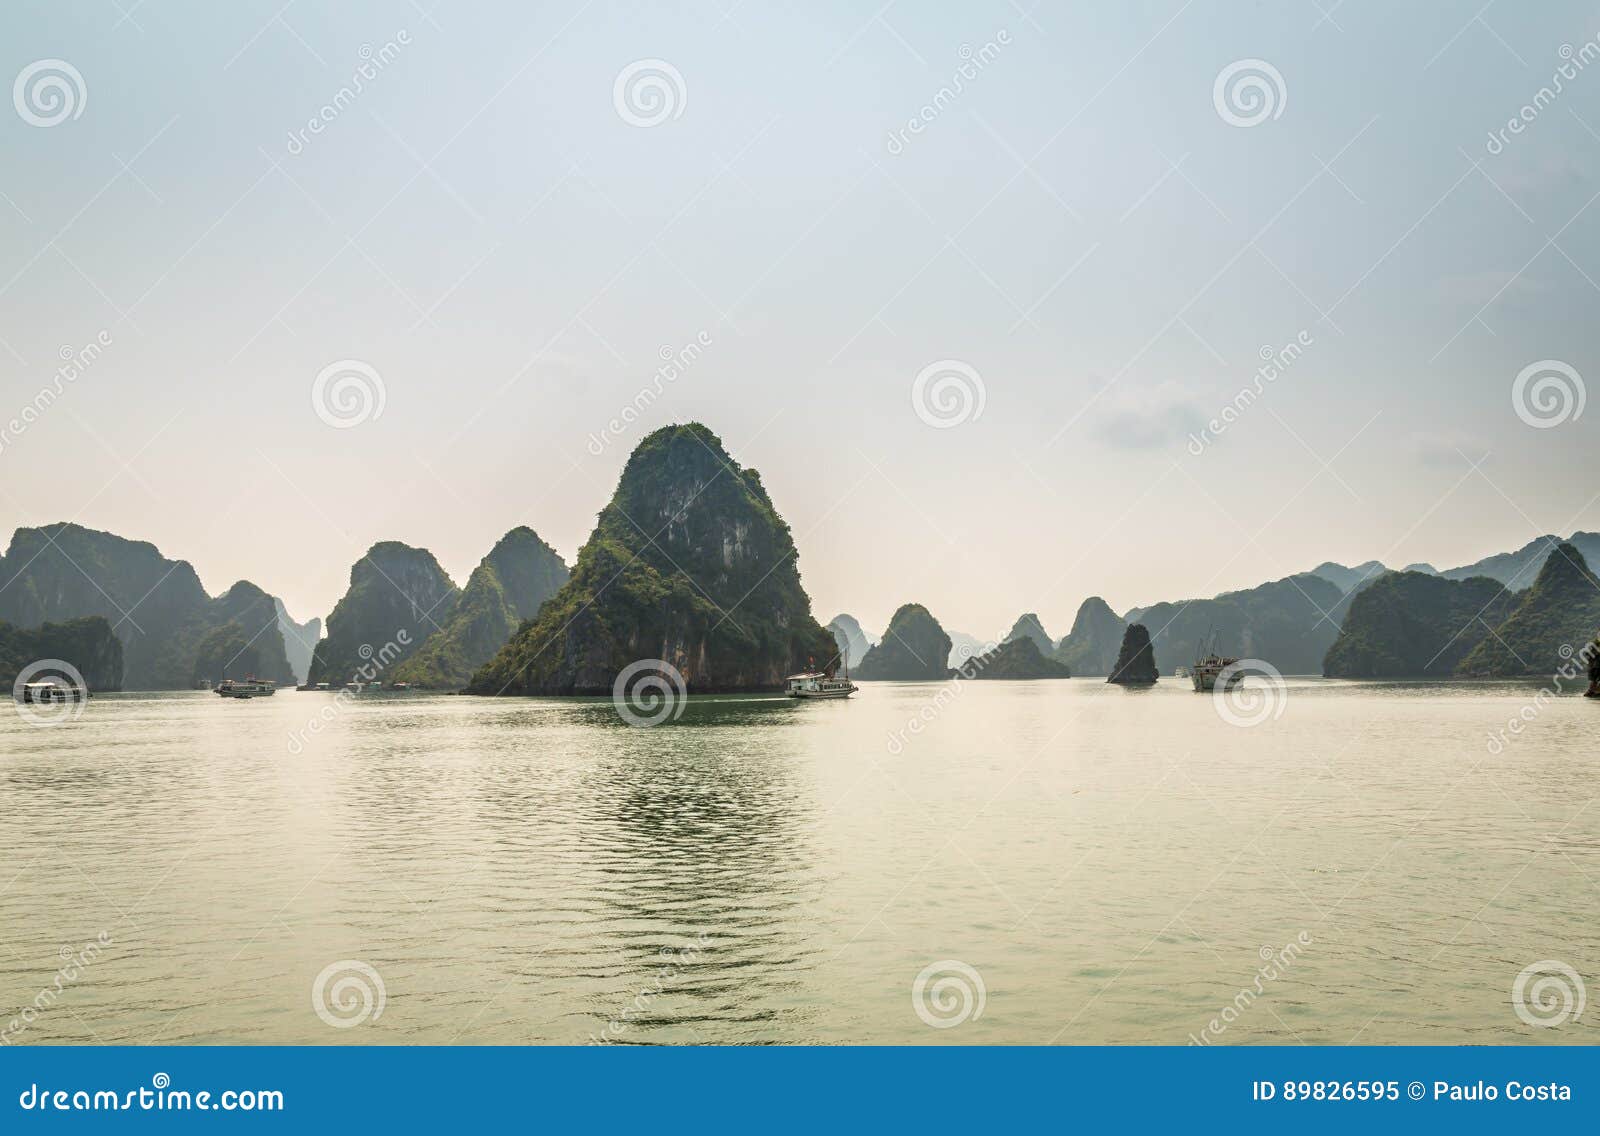 Cruising in Halong Bay, Vietnam. Ha Long Bay, in the Gulf of Tonkin, includes some 1,600 islands and islets, forming a spectacular seascape of limestone pillars. Because of their precipitous nature, most of the islands are uninhabited and unaffected by a human presence. The site`s outstanding scenic beauty is complemented by its great biological interest